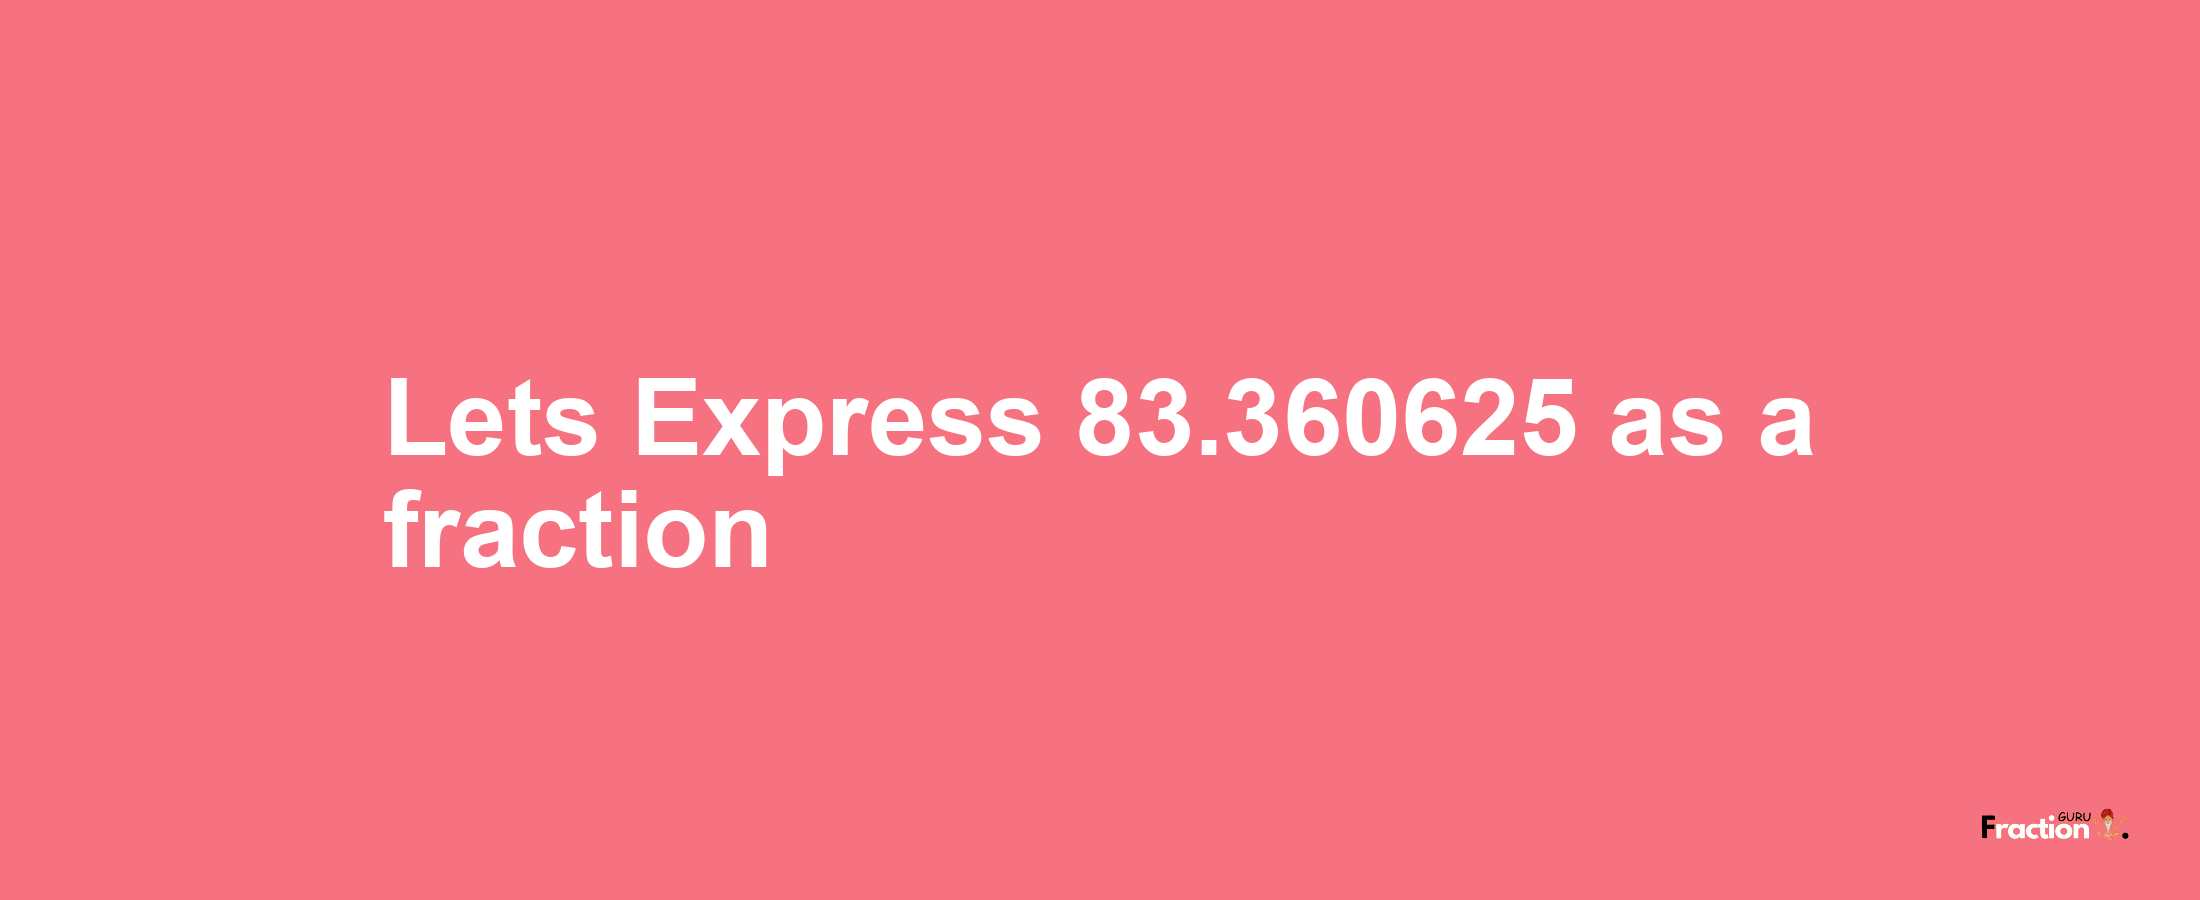 Lets Express 83.360625 as afraction